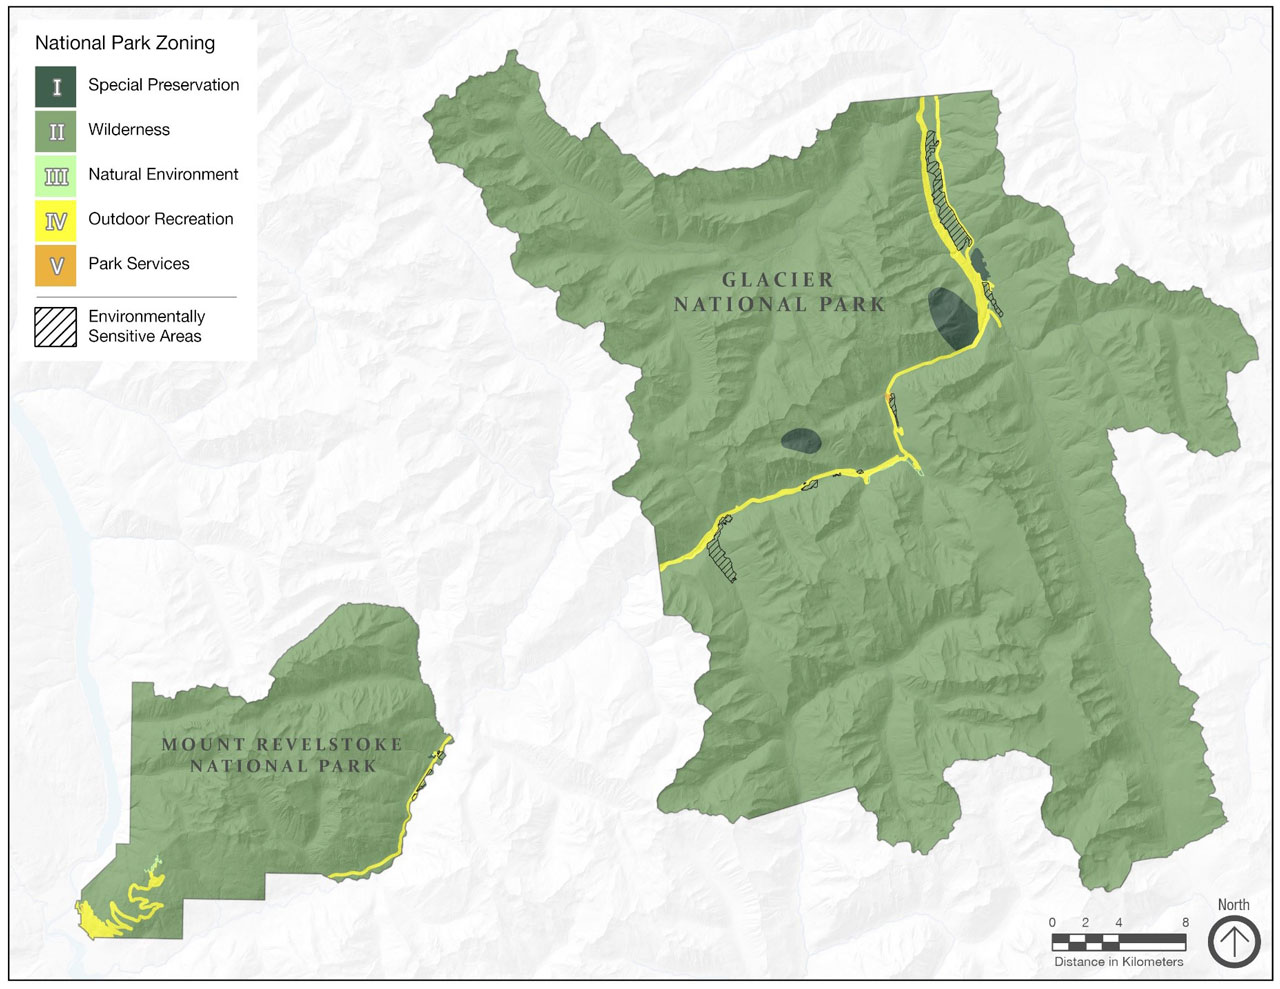 A map of Mount Revelstoke and Glacier national parks. Regions on the map are colour-coded to indicate their classification as specific zone types or environmentally sensitive areas.